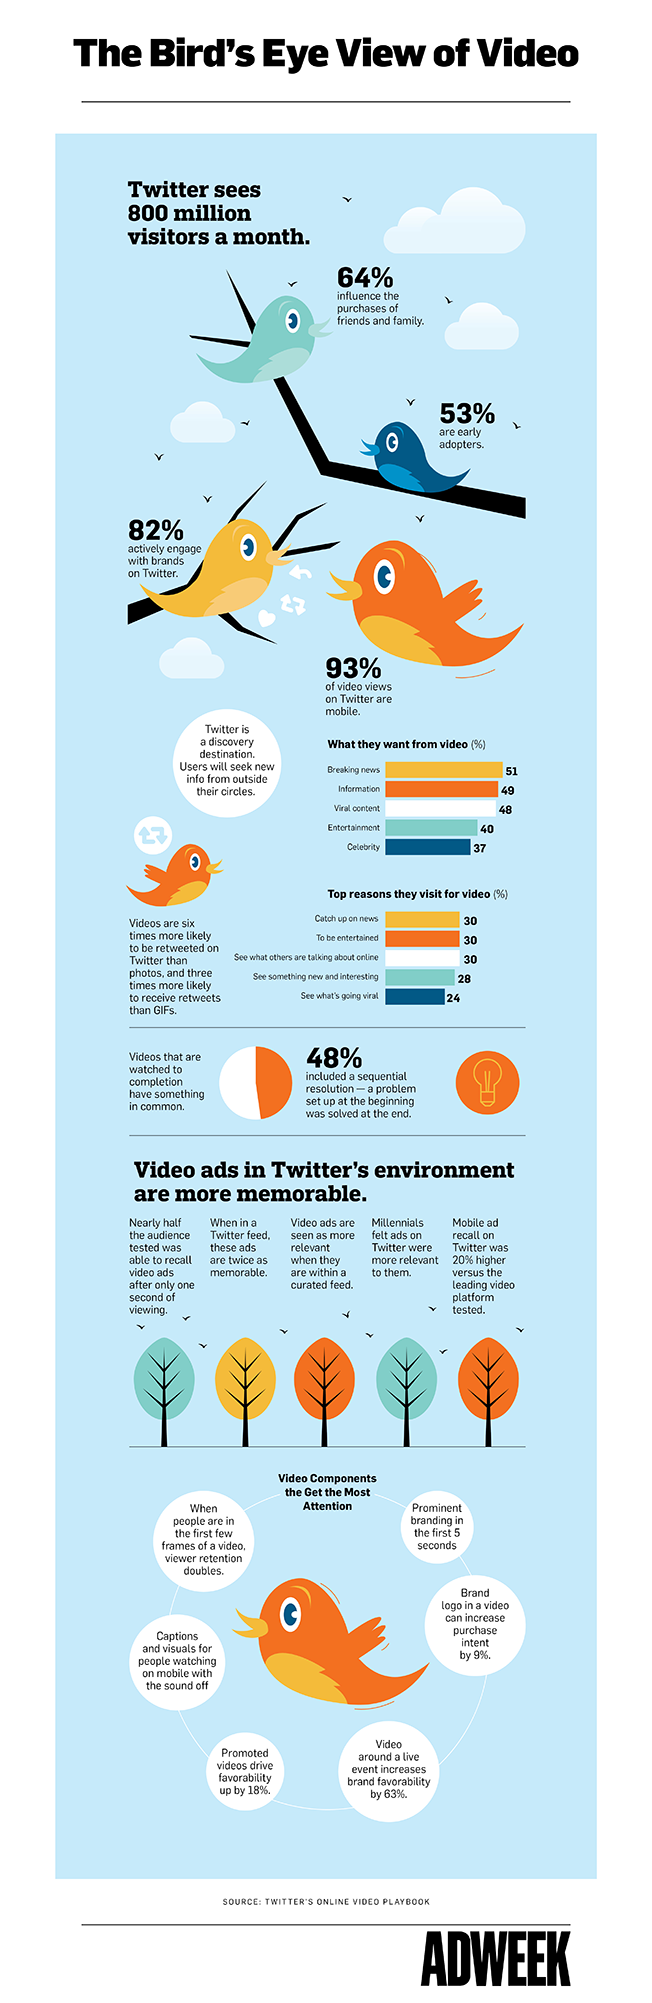 7 Ways to Use Twitter Video to Attract the Right Followers - 652 x 2003 png 347kB